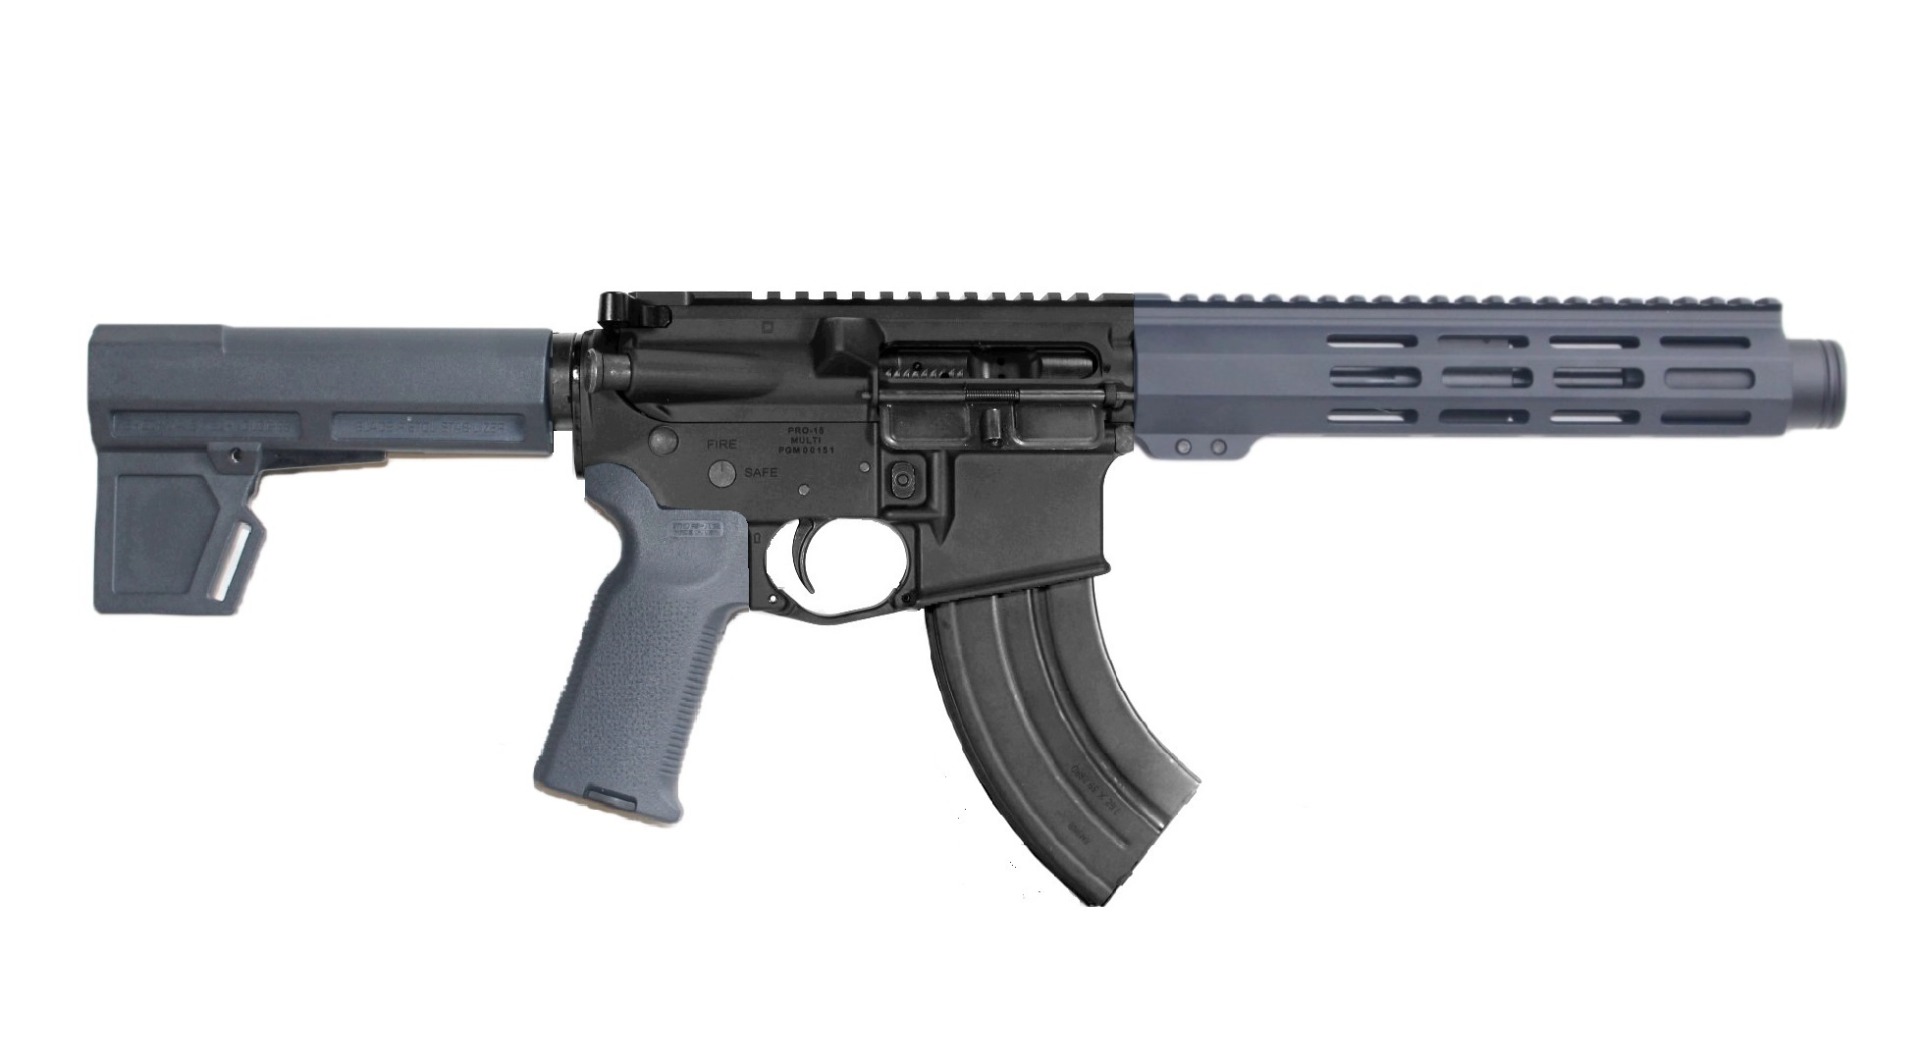 P2A PATRIOT 7.5" 7.62x39 1/10 Pistol Length Melonite M-LOK Pistol with Flash Can - BLK/GRAY